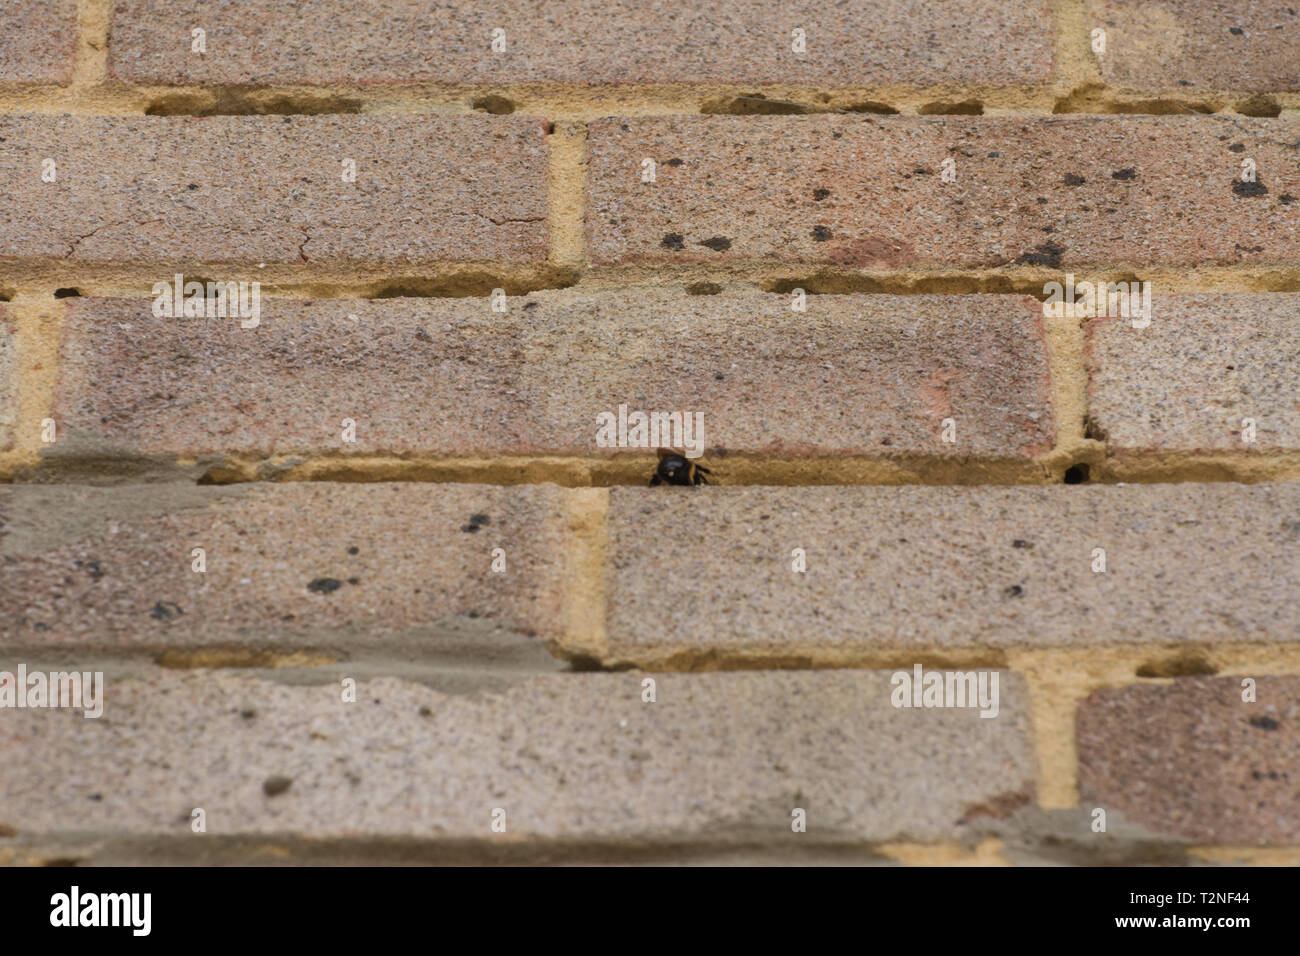 Structural damage (holes) in the mortar between the bricks in the wall of a house caused by the hairy-footed flower bee (Anthophora plumipes) nesting. Stock Photo